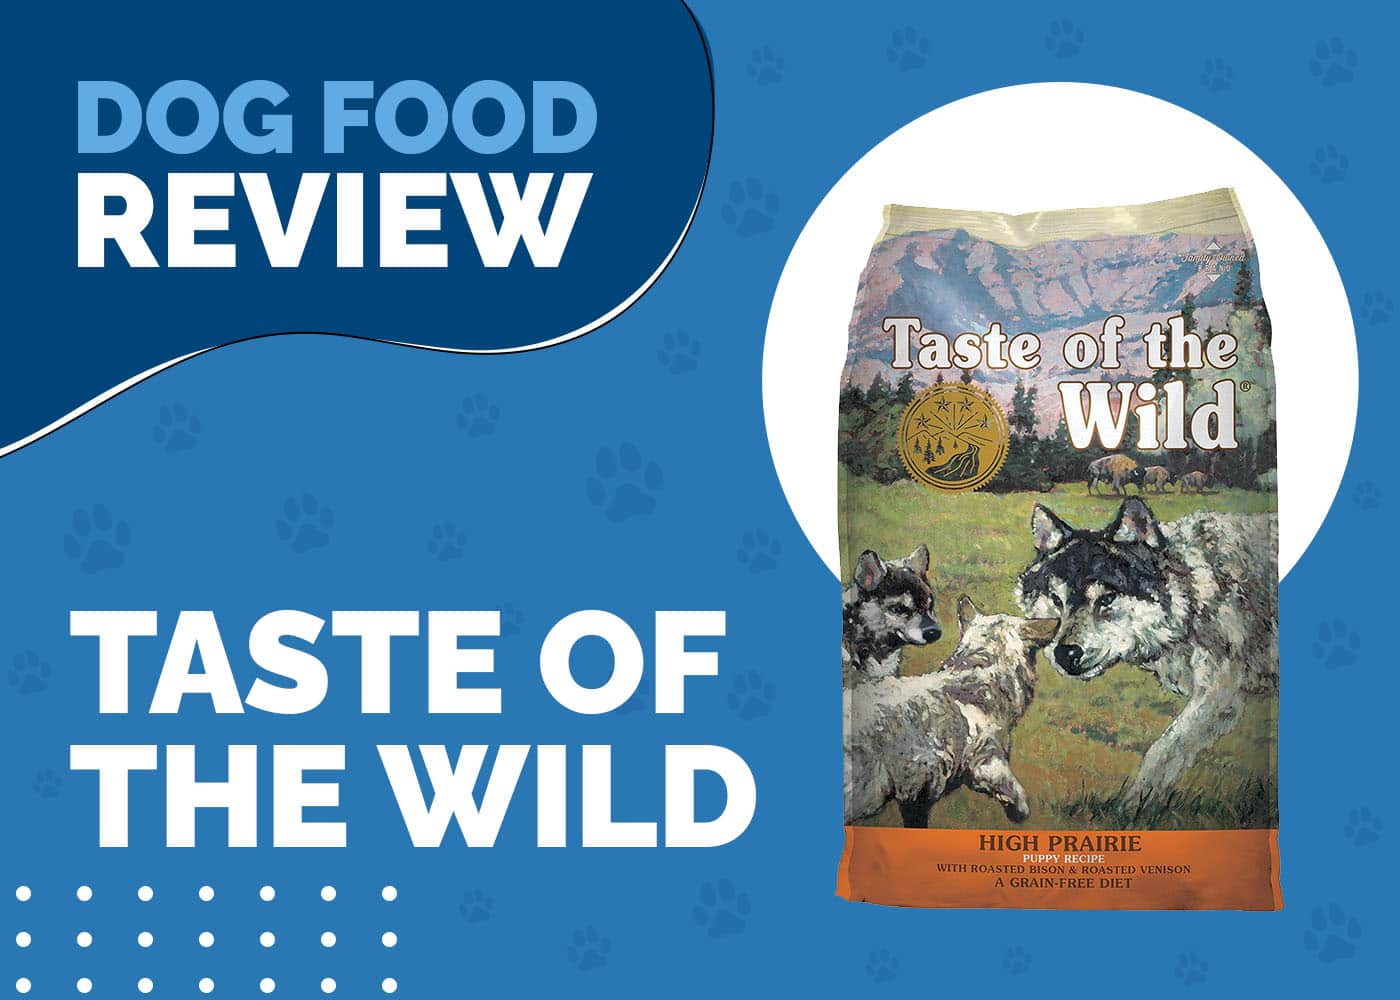 Taste of the Wild High Prairie Dog Food Review